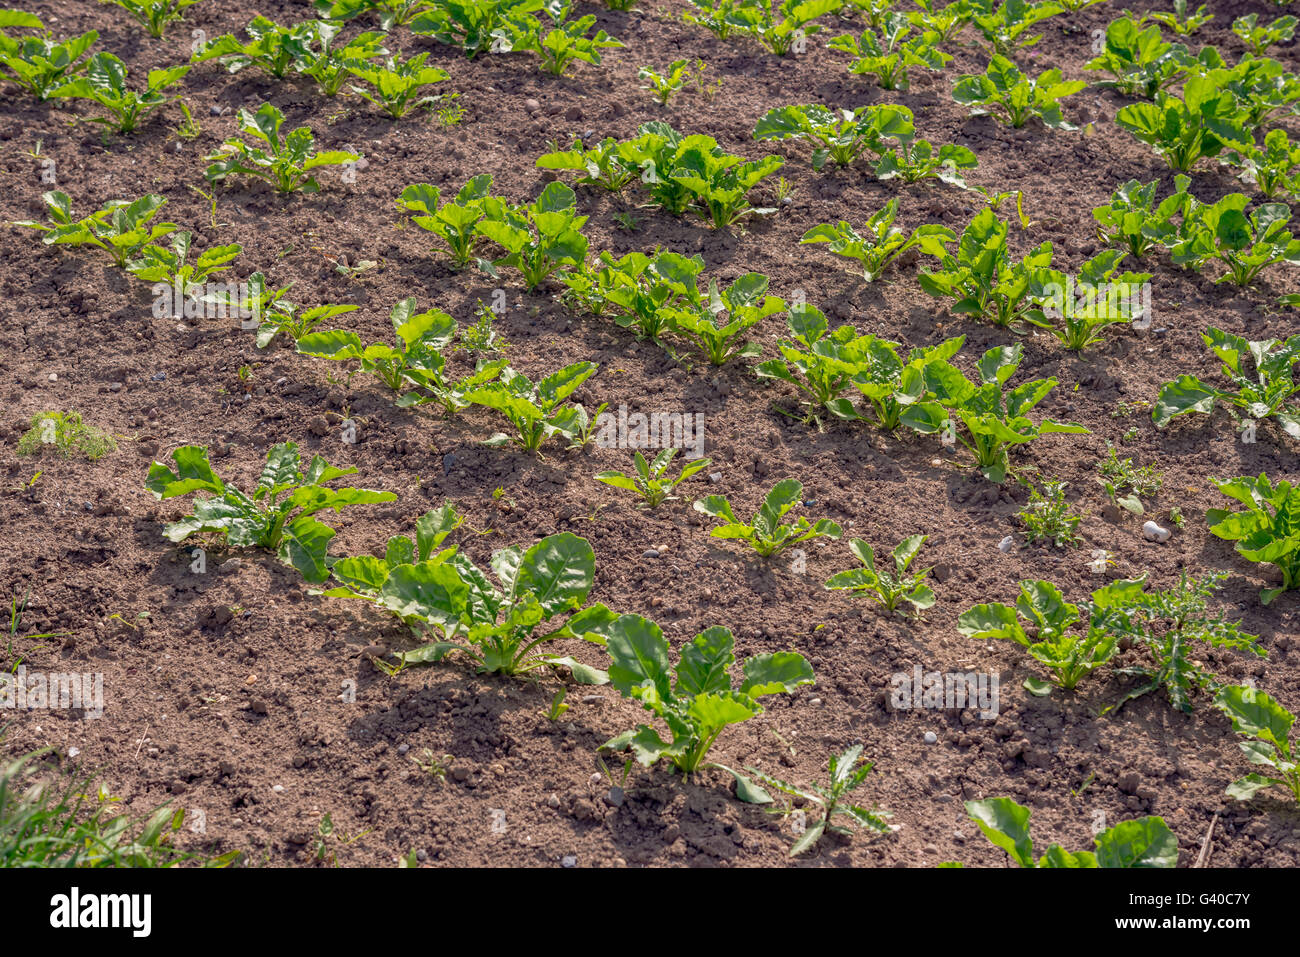 Landscape view of a freshly growing cabbage field. Stock Photo